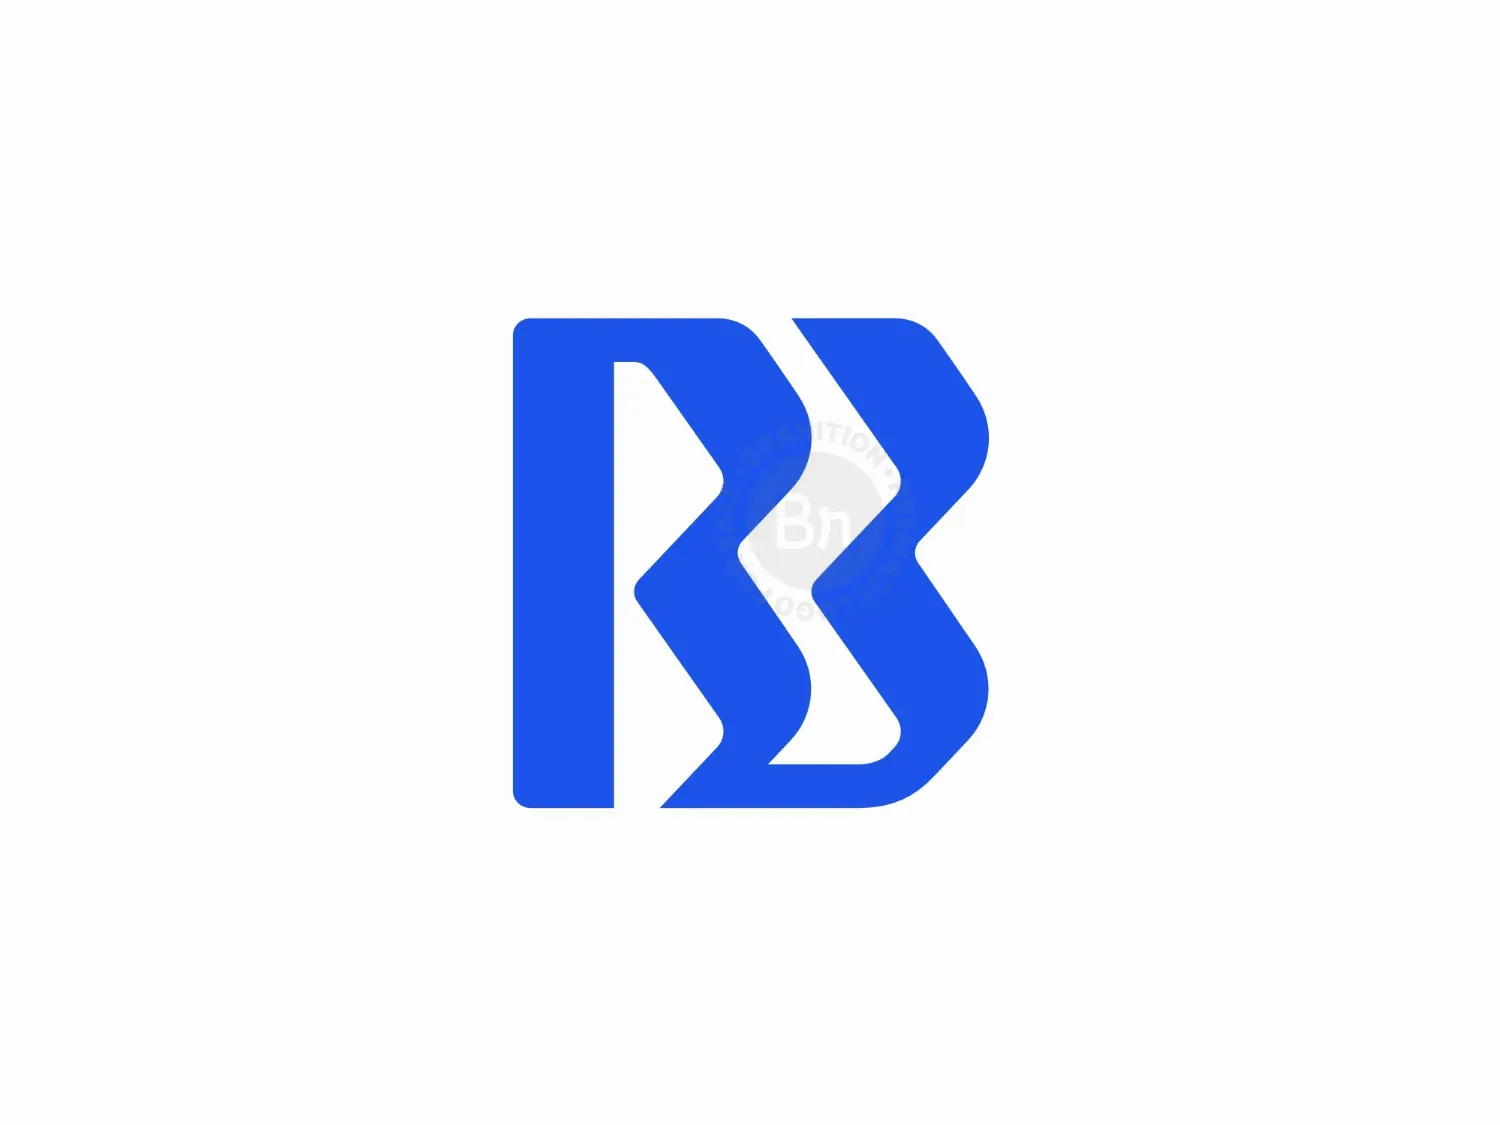 Abtract BB Or B3 Logo